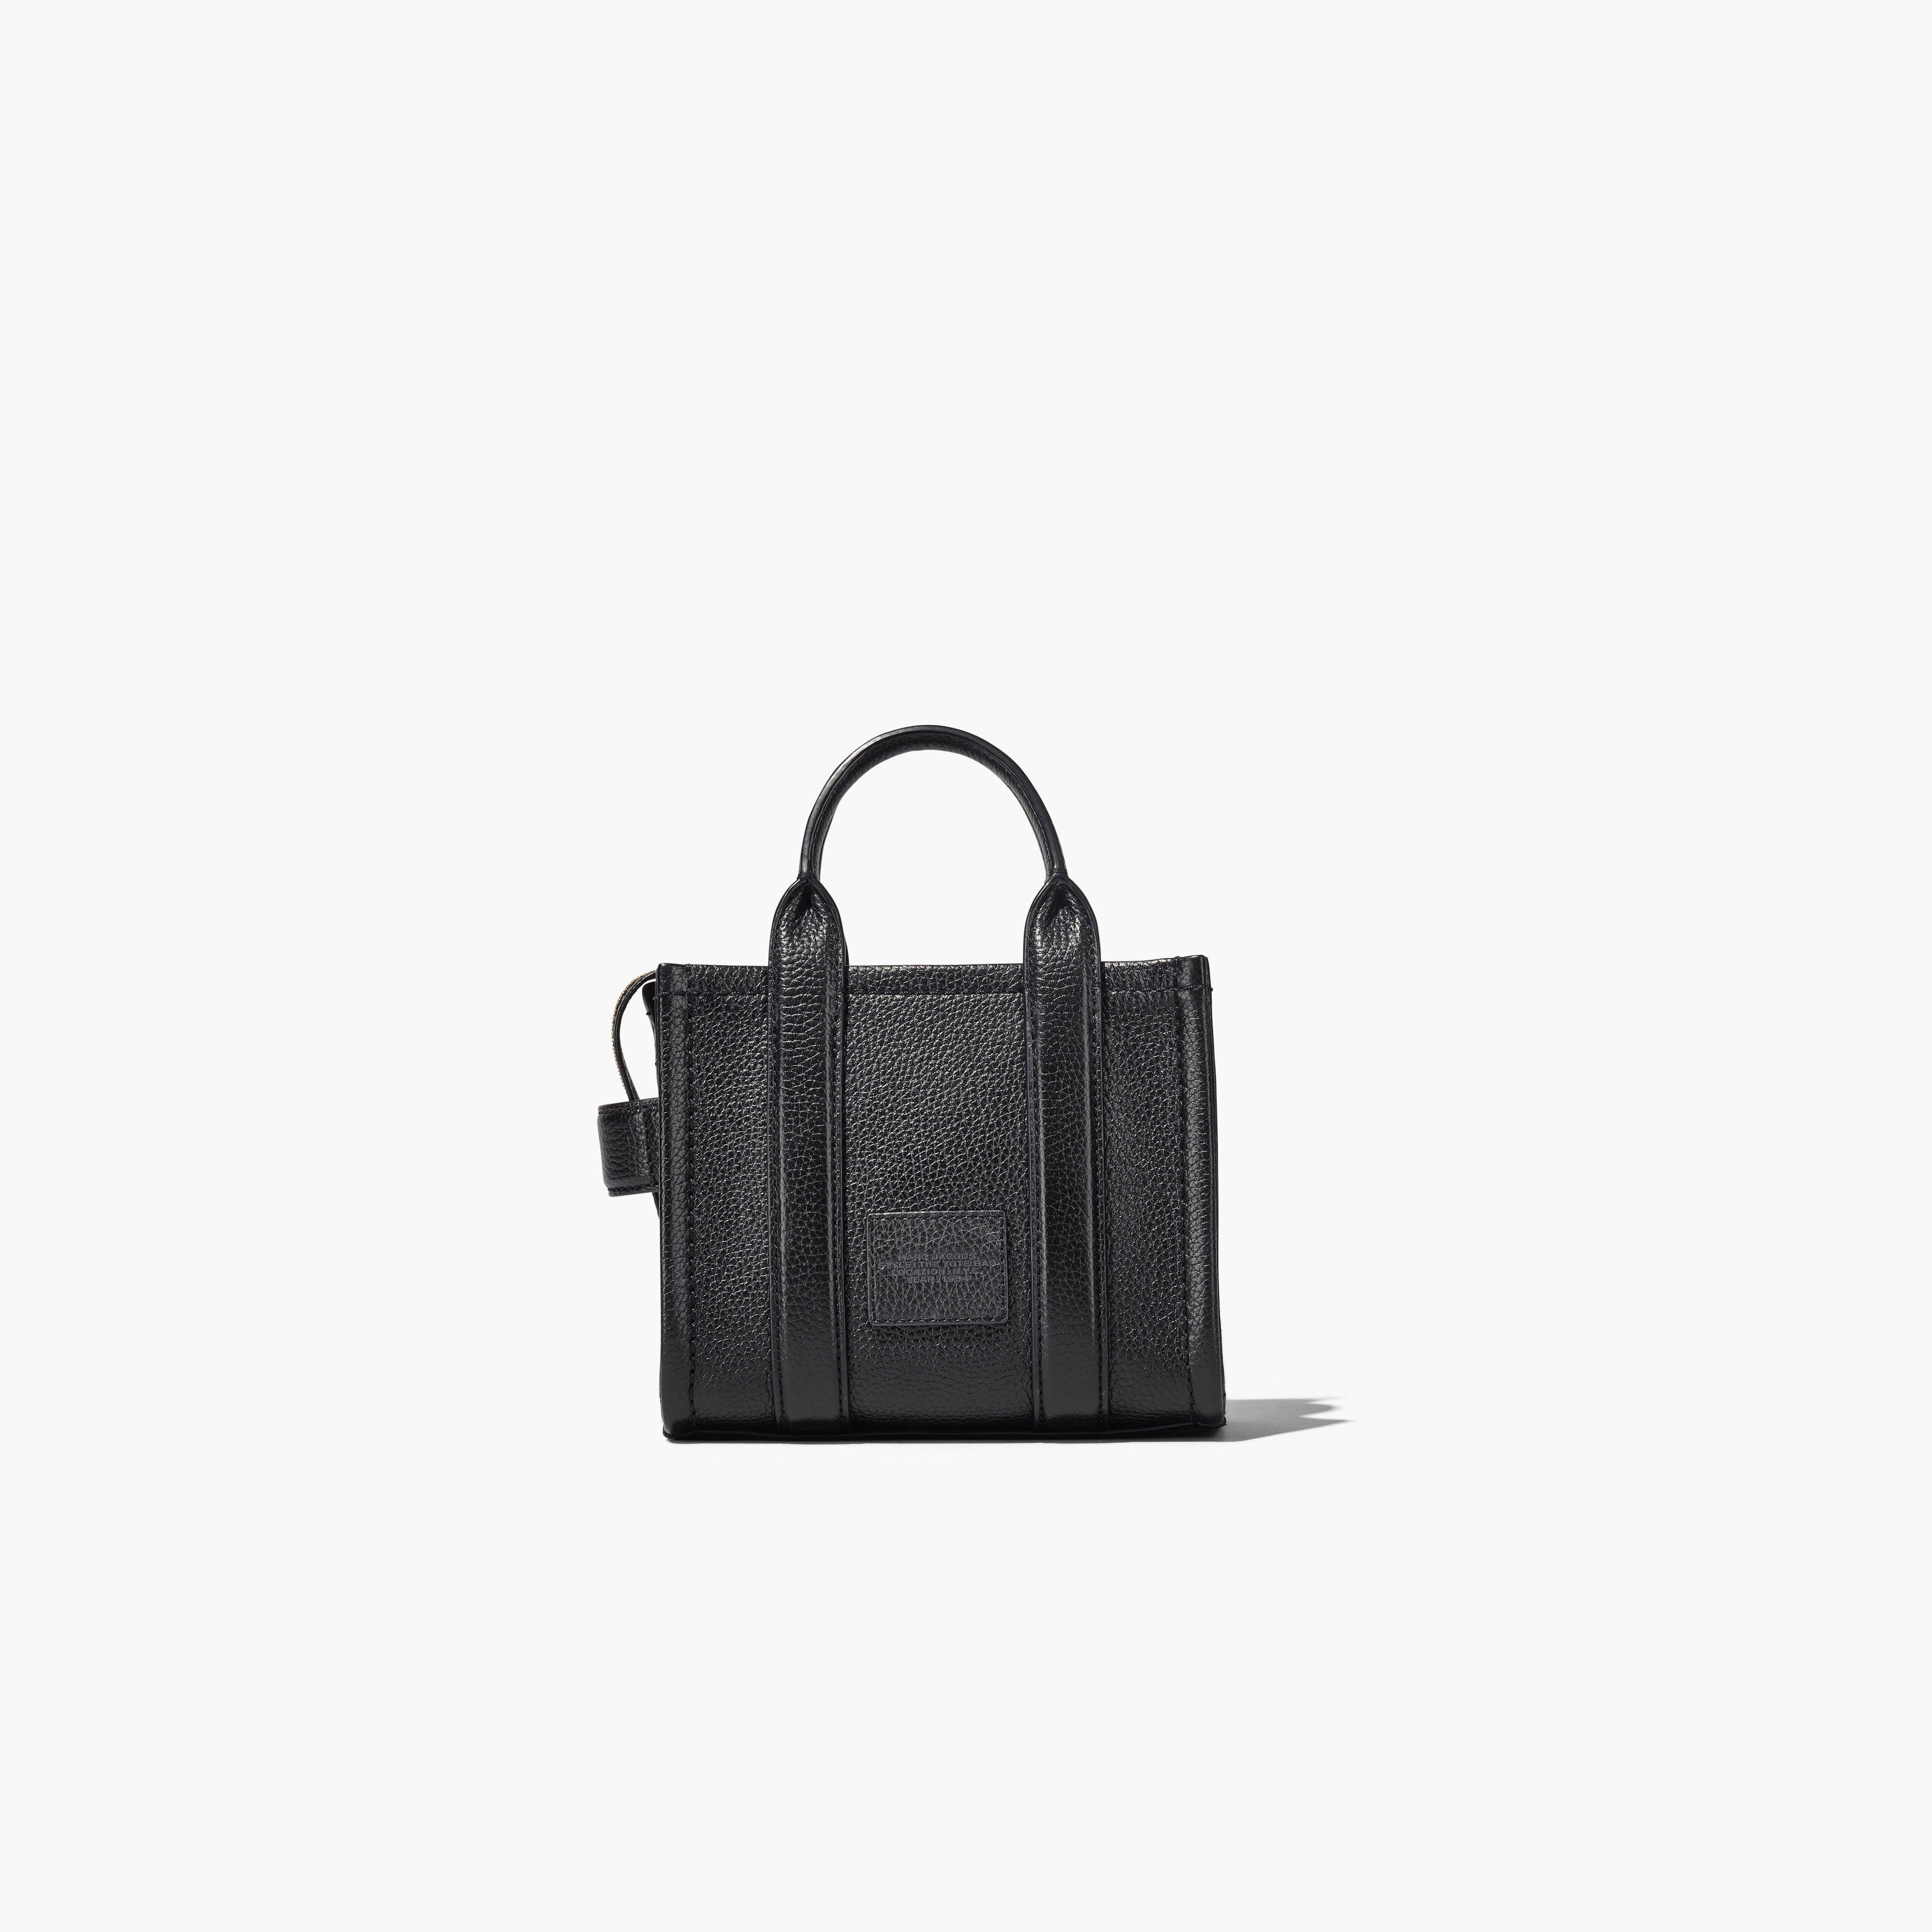 THE LEATHER MICRO TOTE BAG - 6